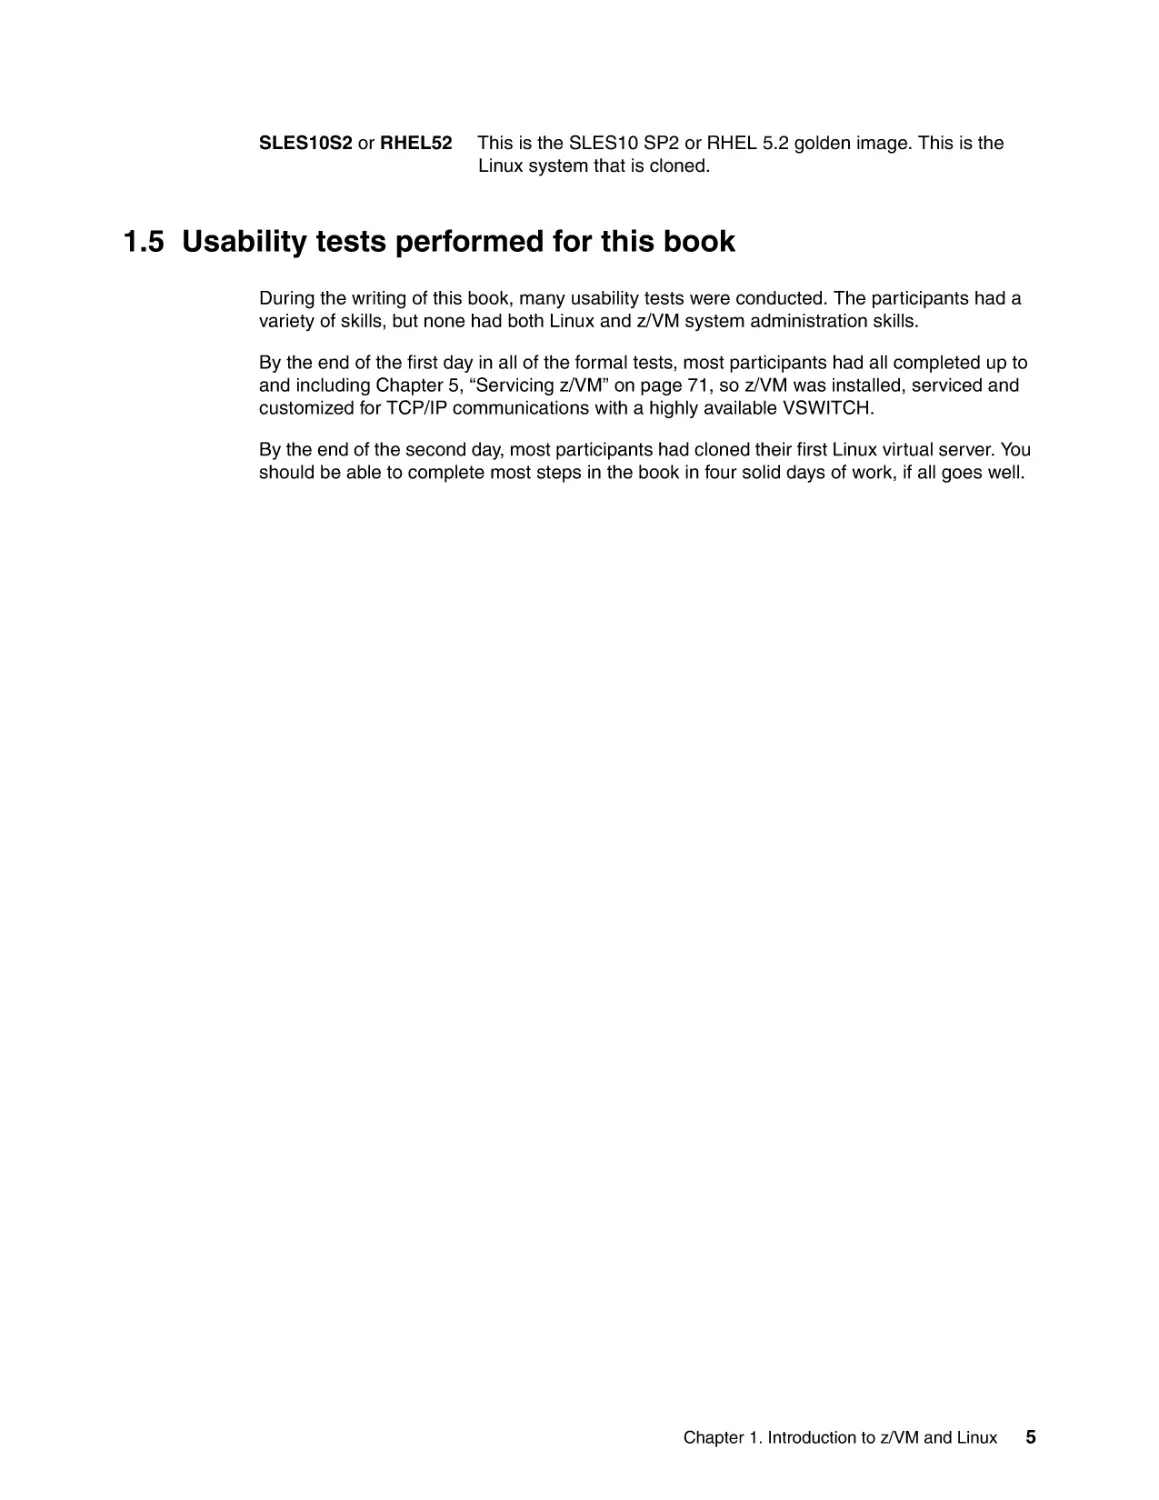 1.5 Usability tests performed for this book